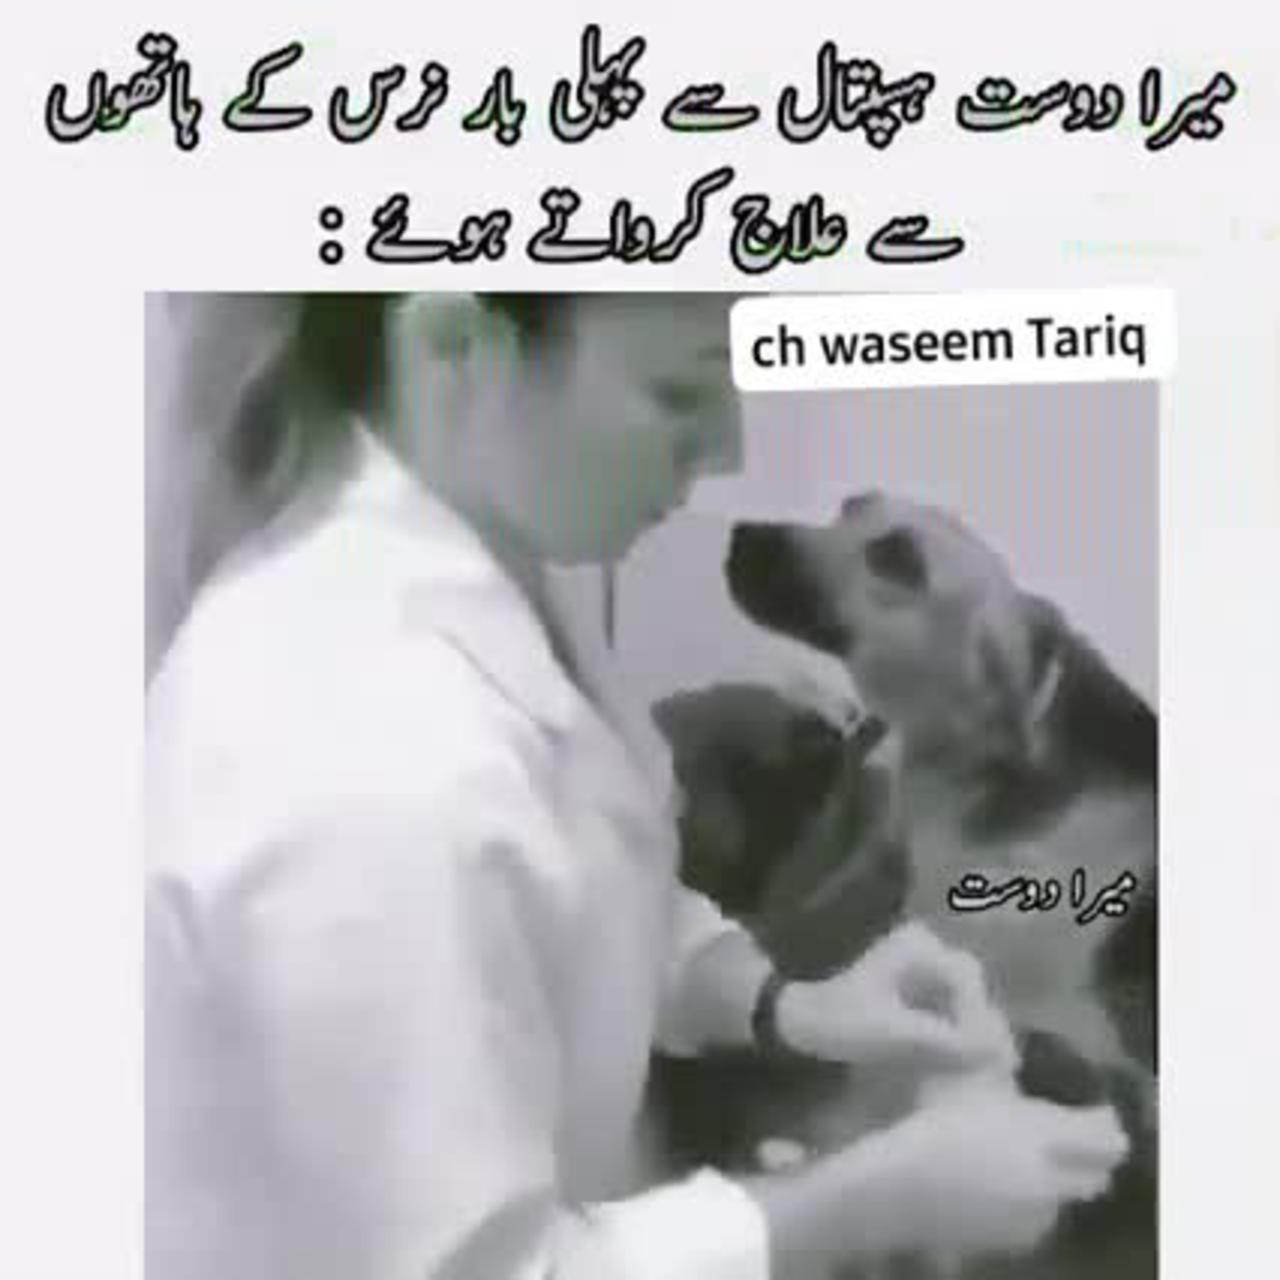 Funny moments of Dog when he see beautiful nurse 💟